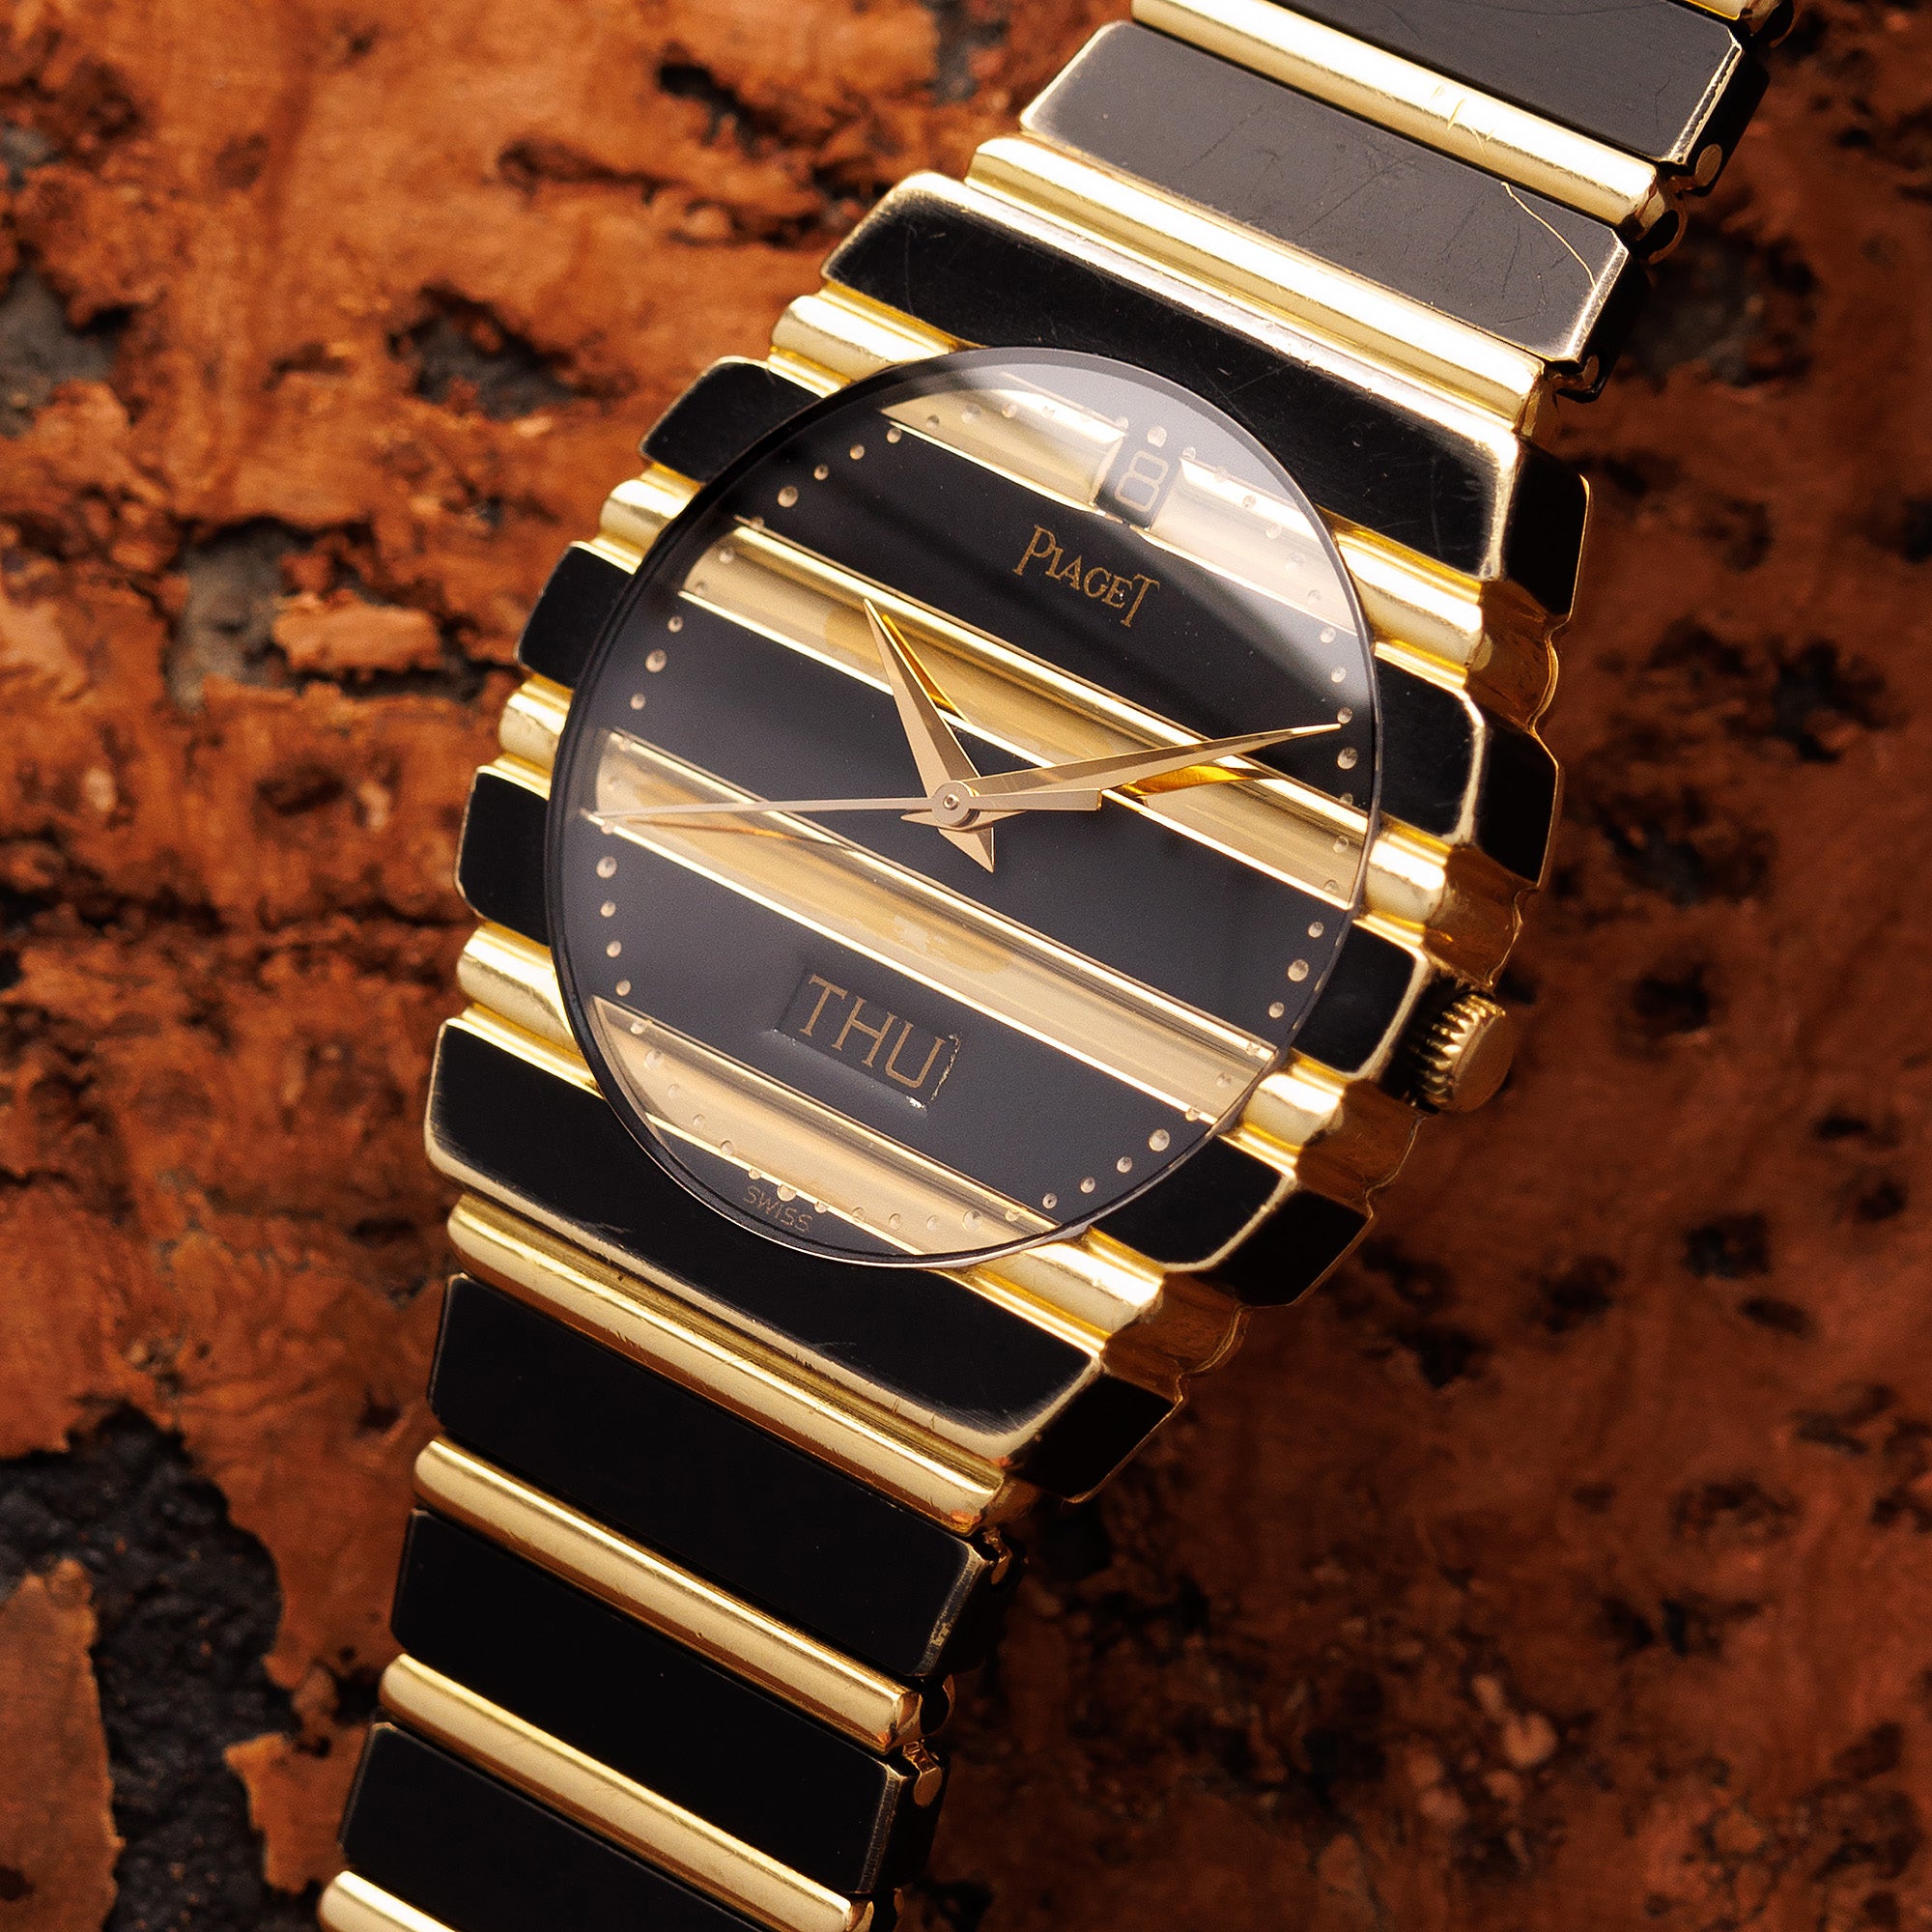 Piaget - Piaget Yellow Gold and DLC Polo Watch Ref. 15562C701 - The Keystone Watches